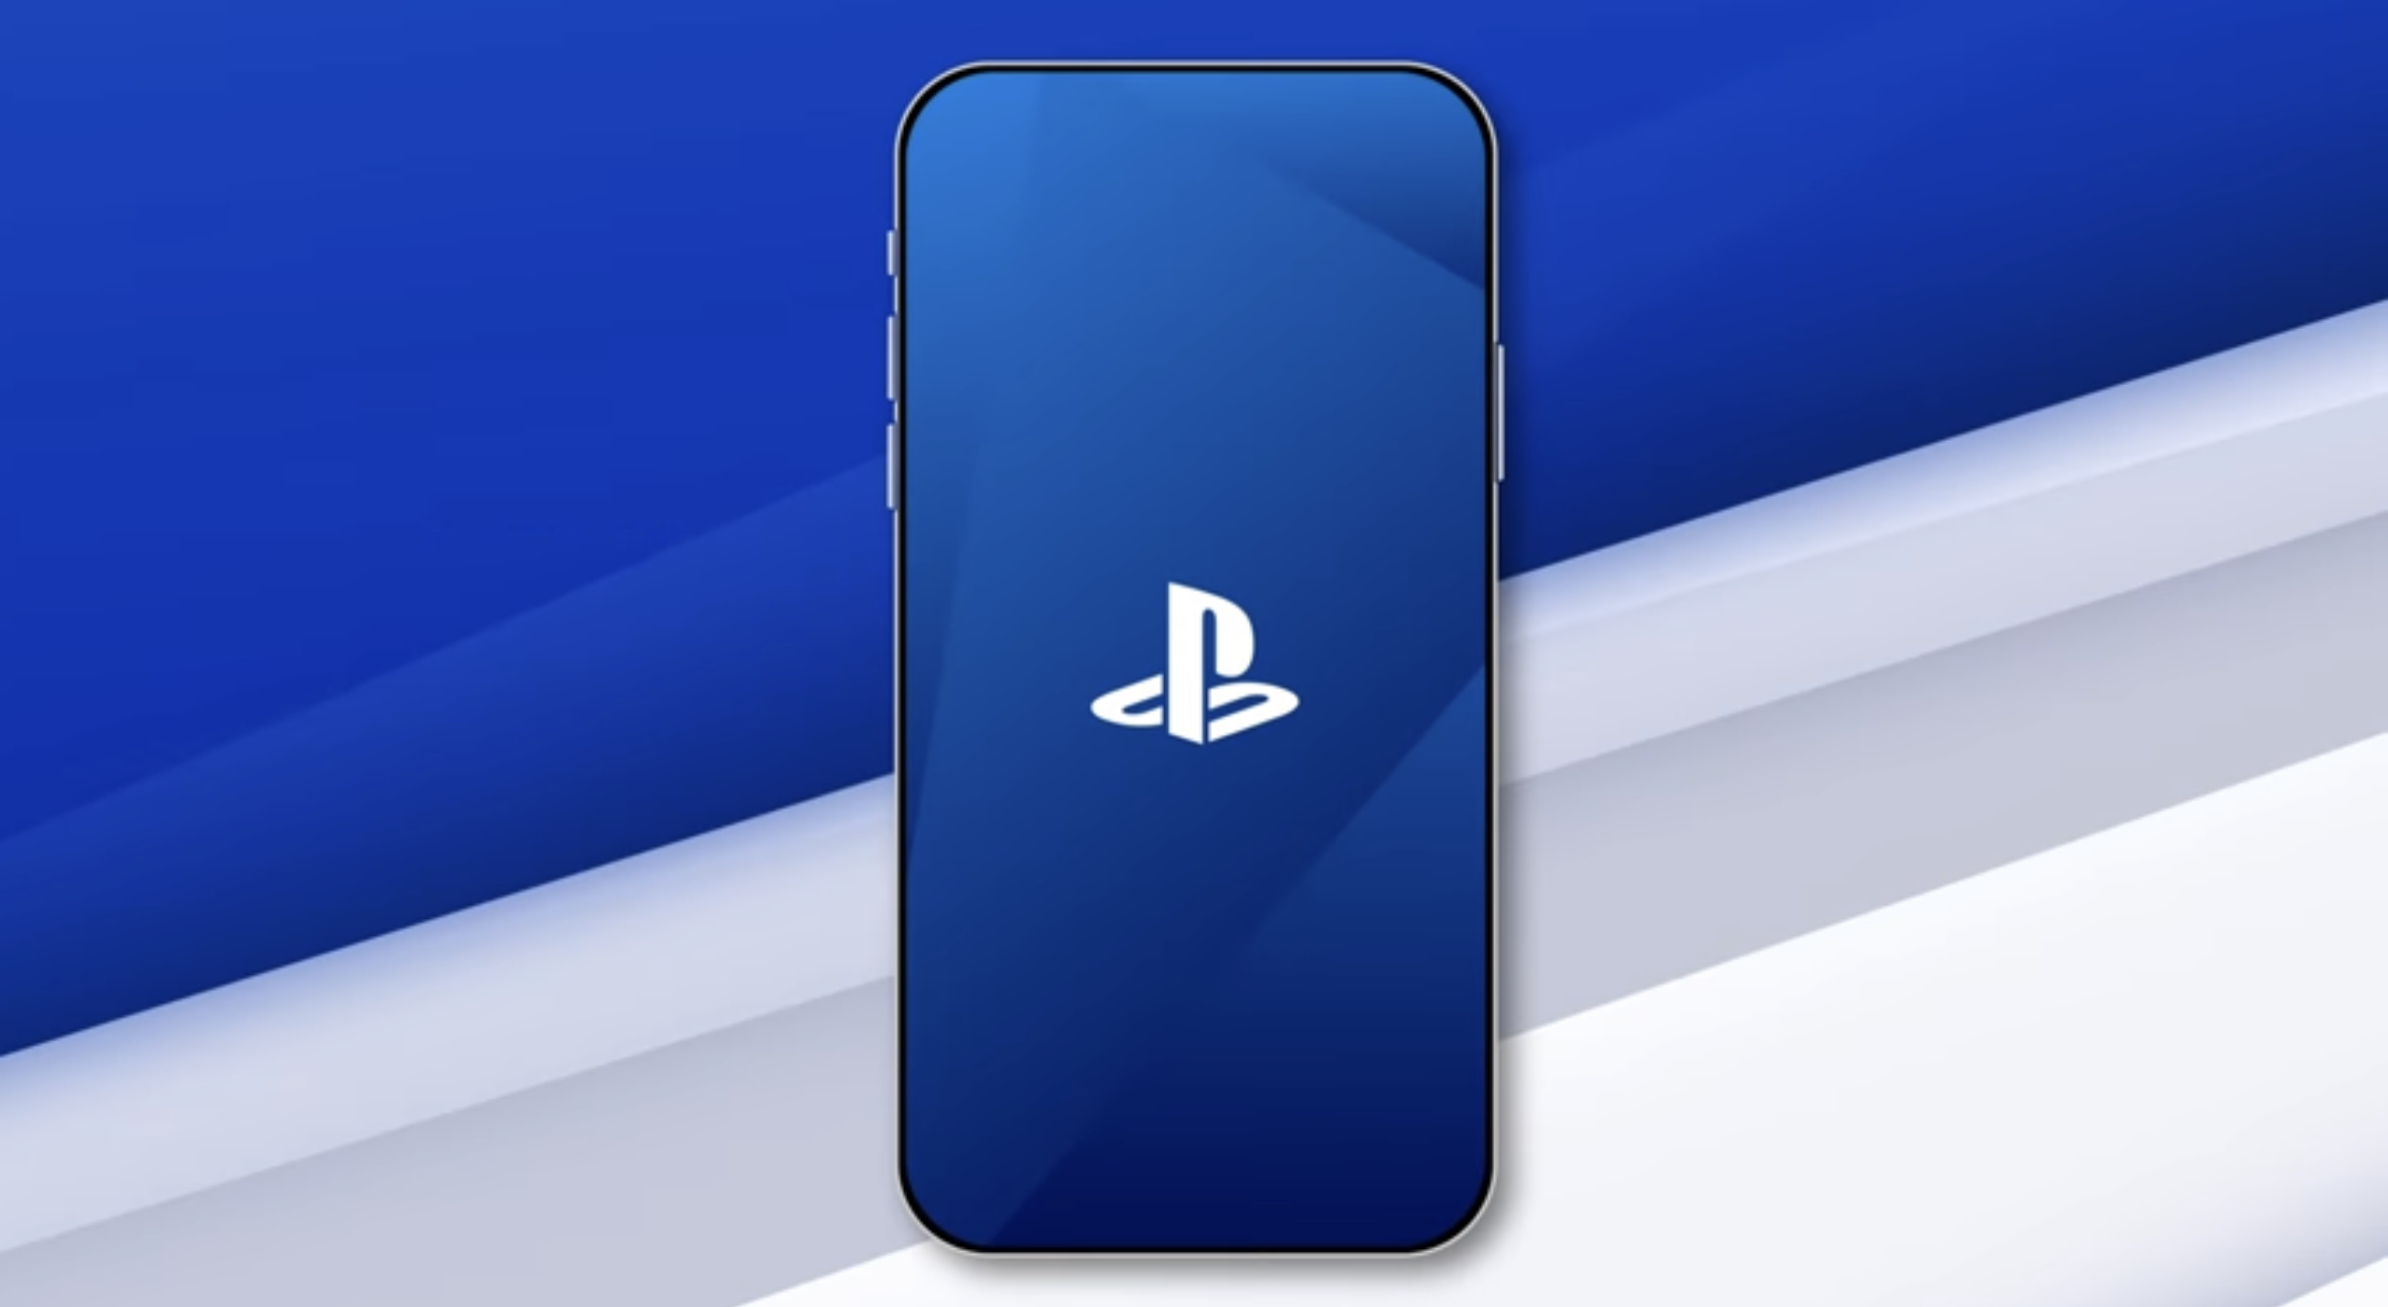 ‘PlayStation App’ Gets Big Update Adding Controller Support To Navigate the App, Launch Games, View Game Help for Trophies, and More